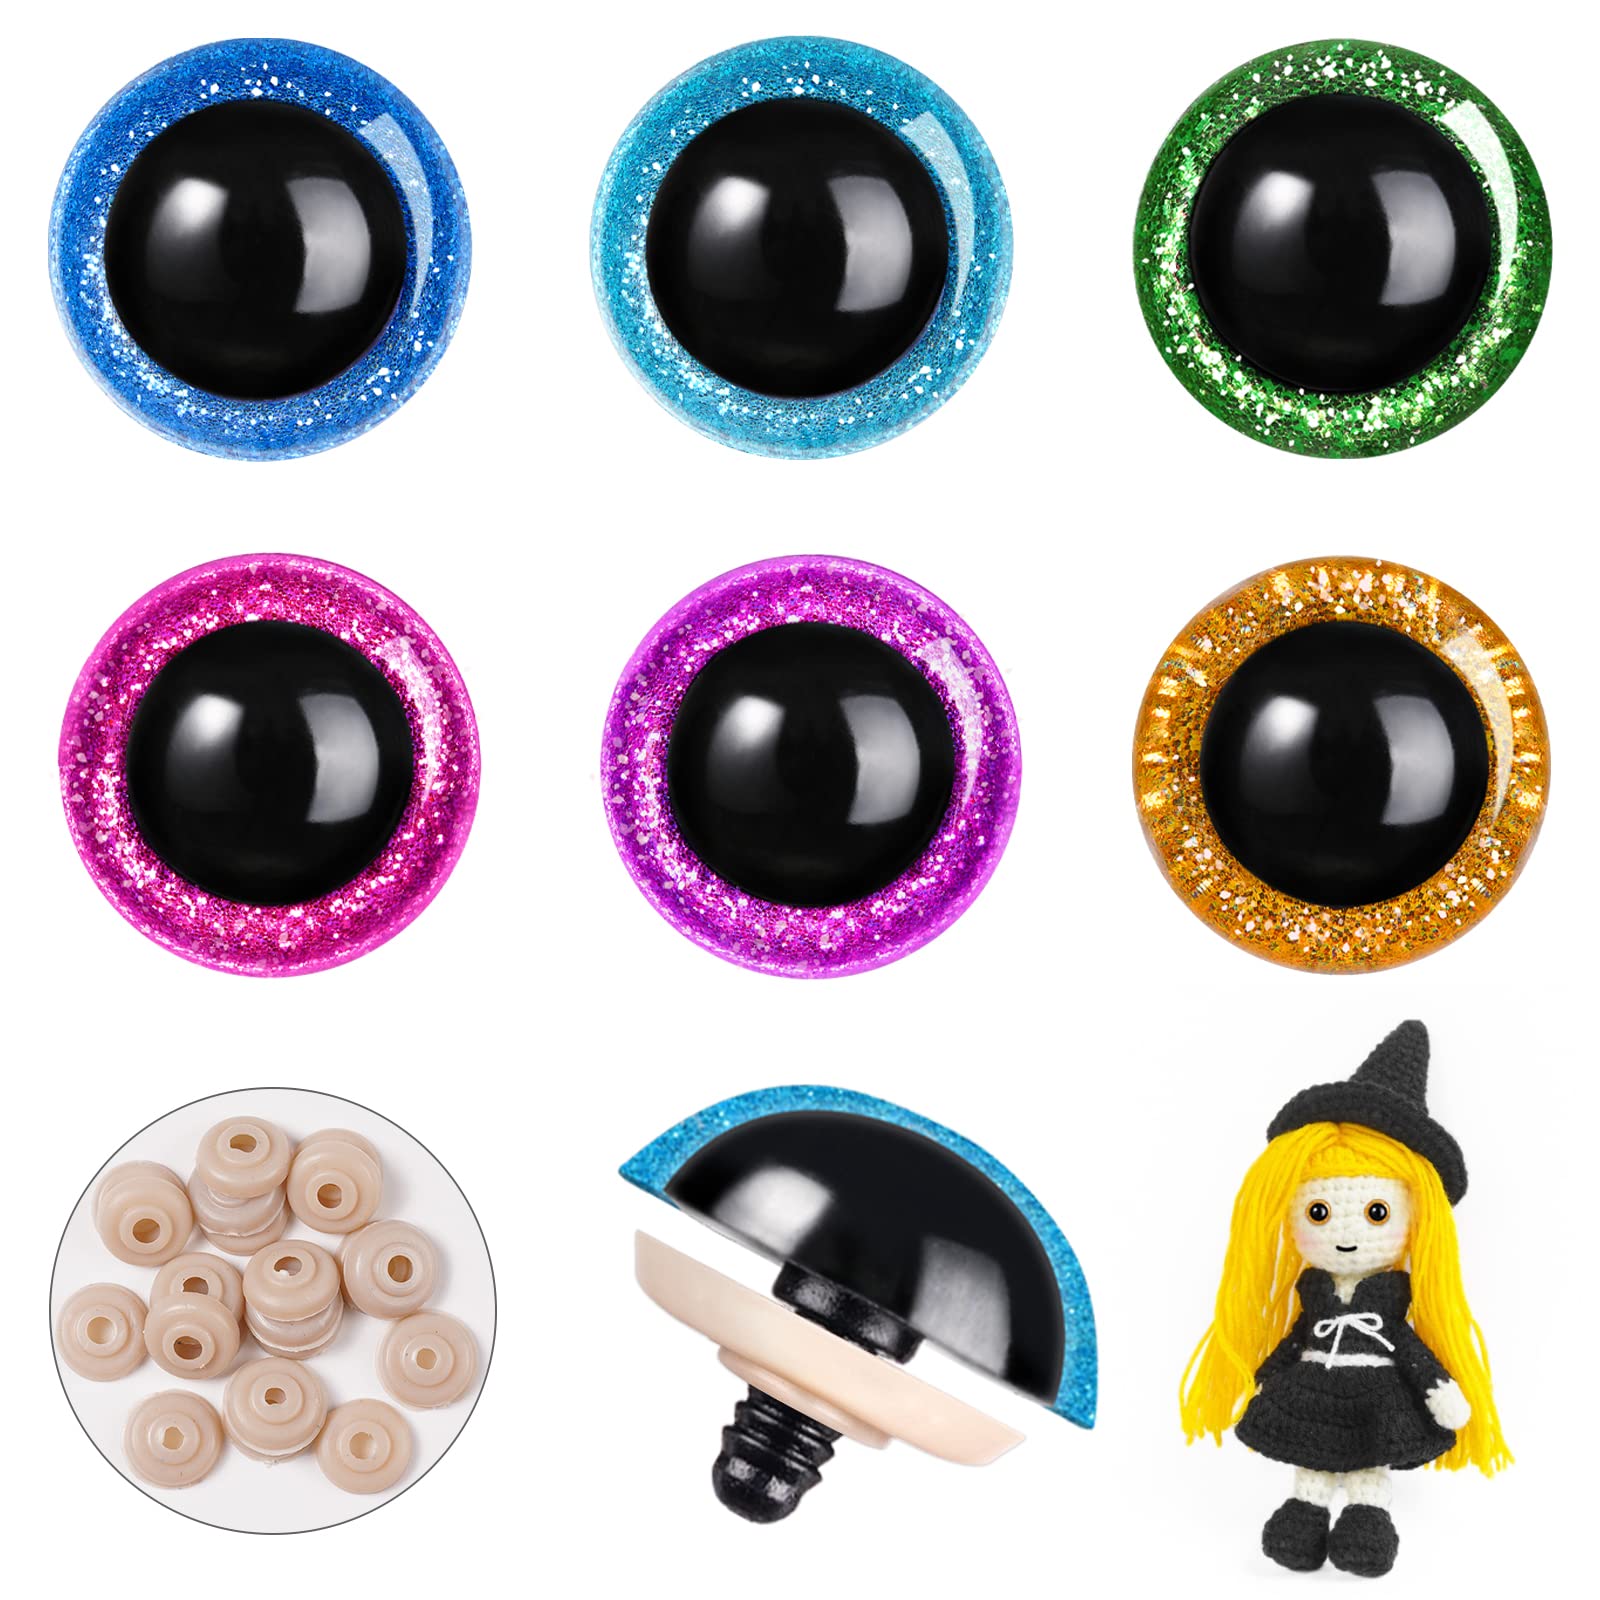 Safety Eyes 240pcs 16mm for Amigurumi with Washers 60 Pairs Glitter ...